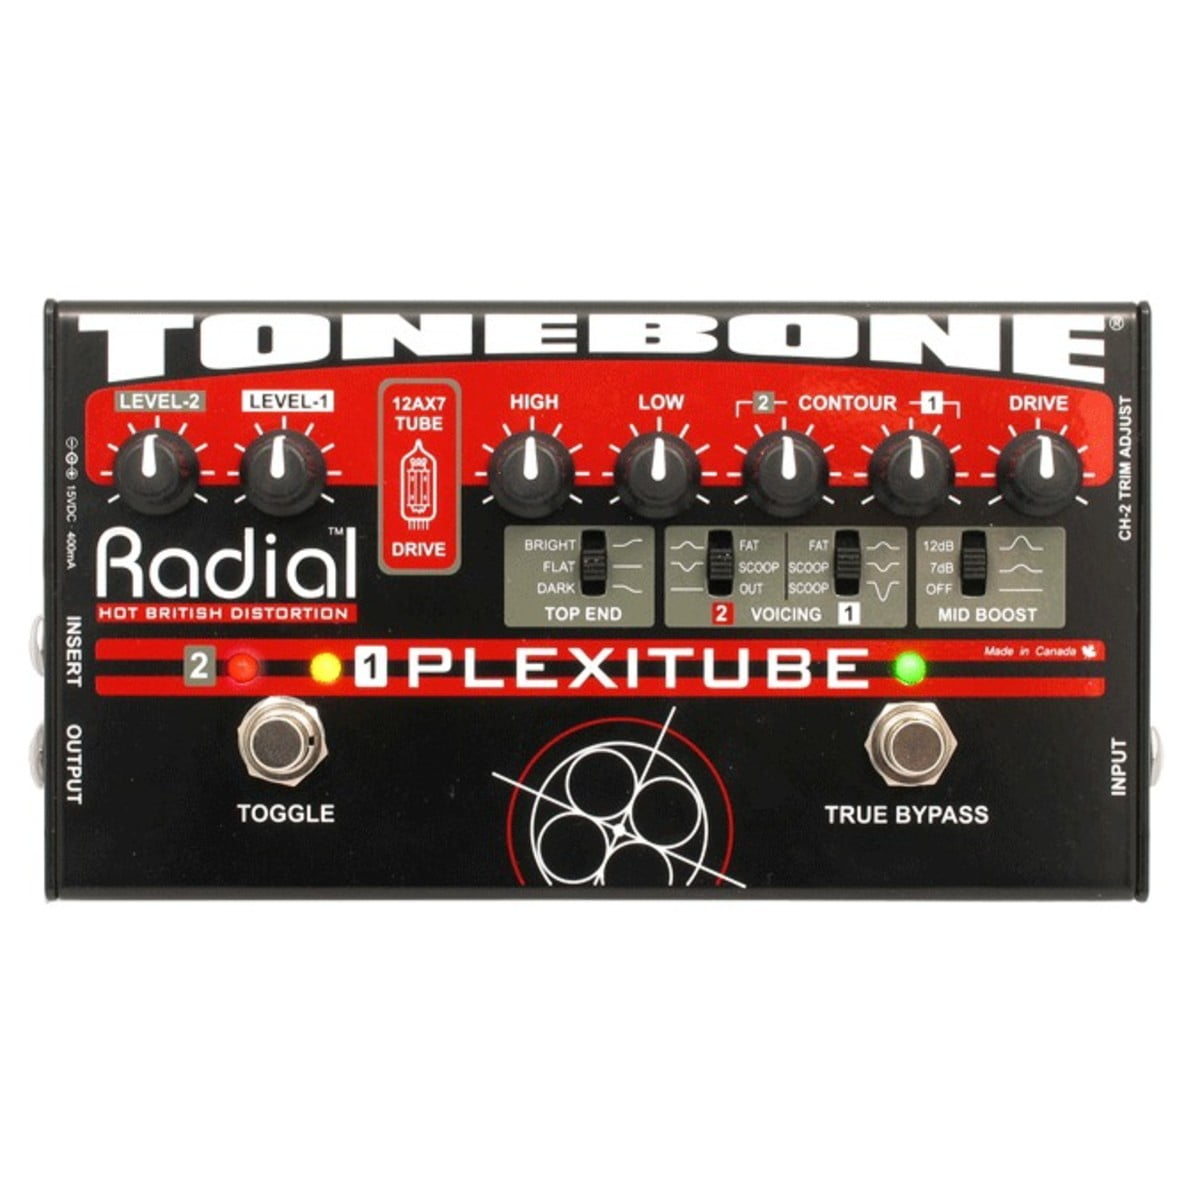 Radial Tonebone Plexitube 12AX7 Tube Distortion Pedal - Nearly New - New Radial     Multi Effects            Distortion  Guitar Effect Pedal